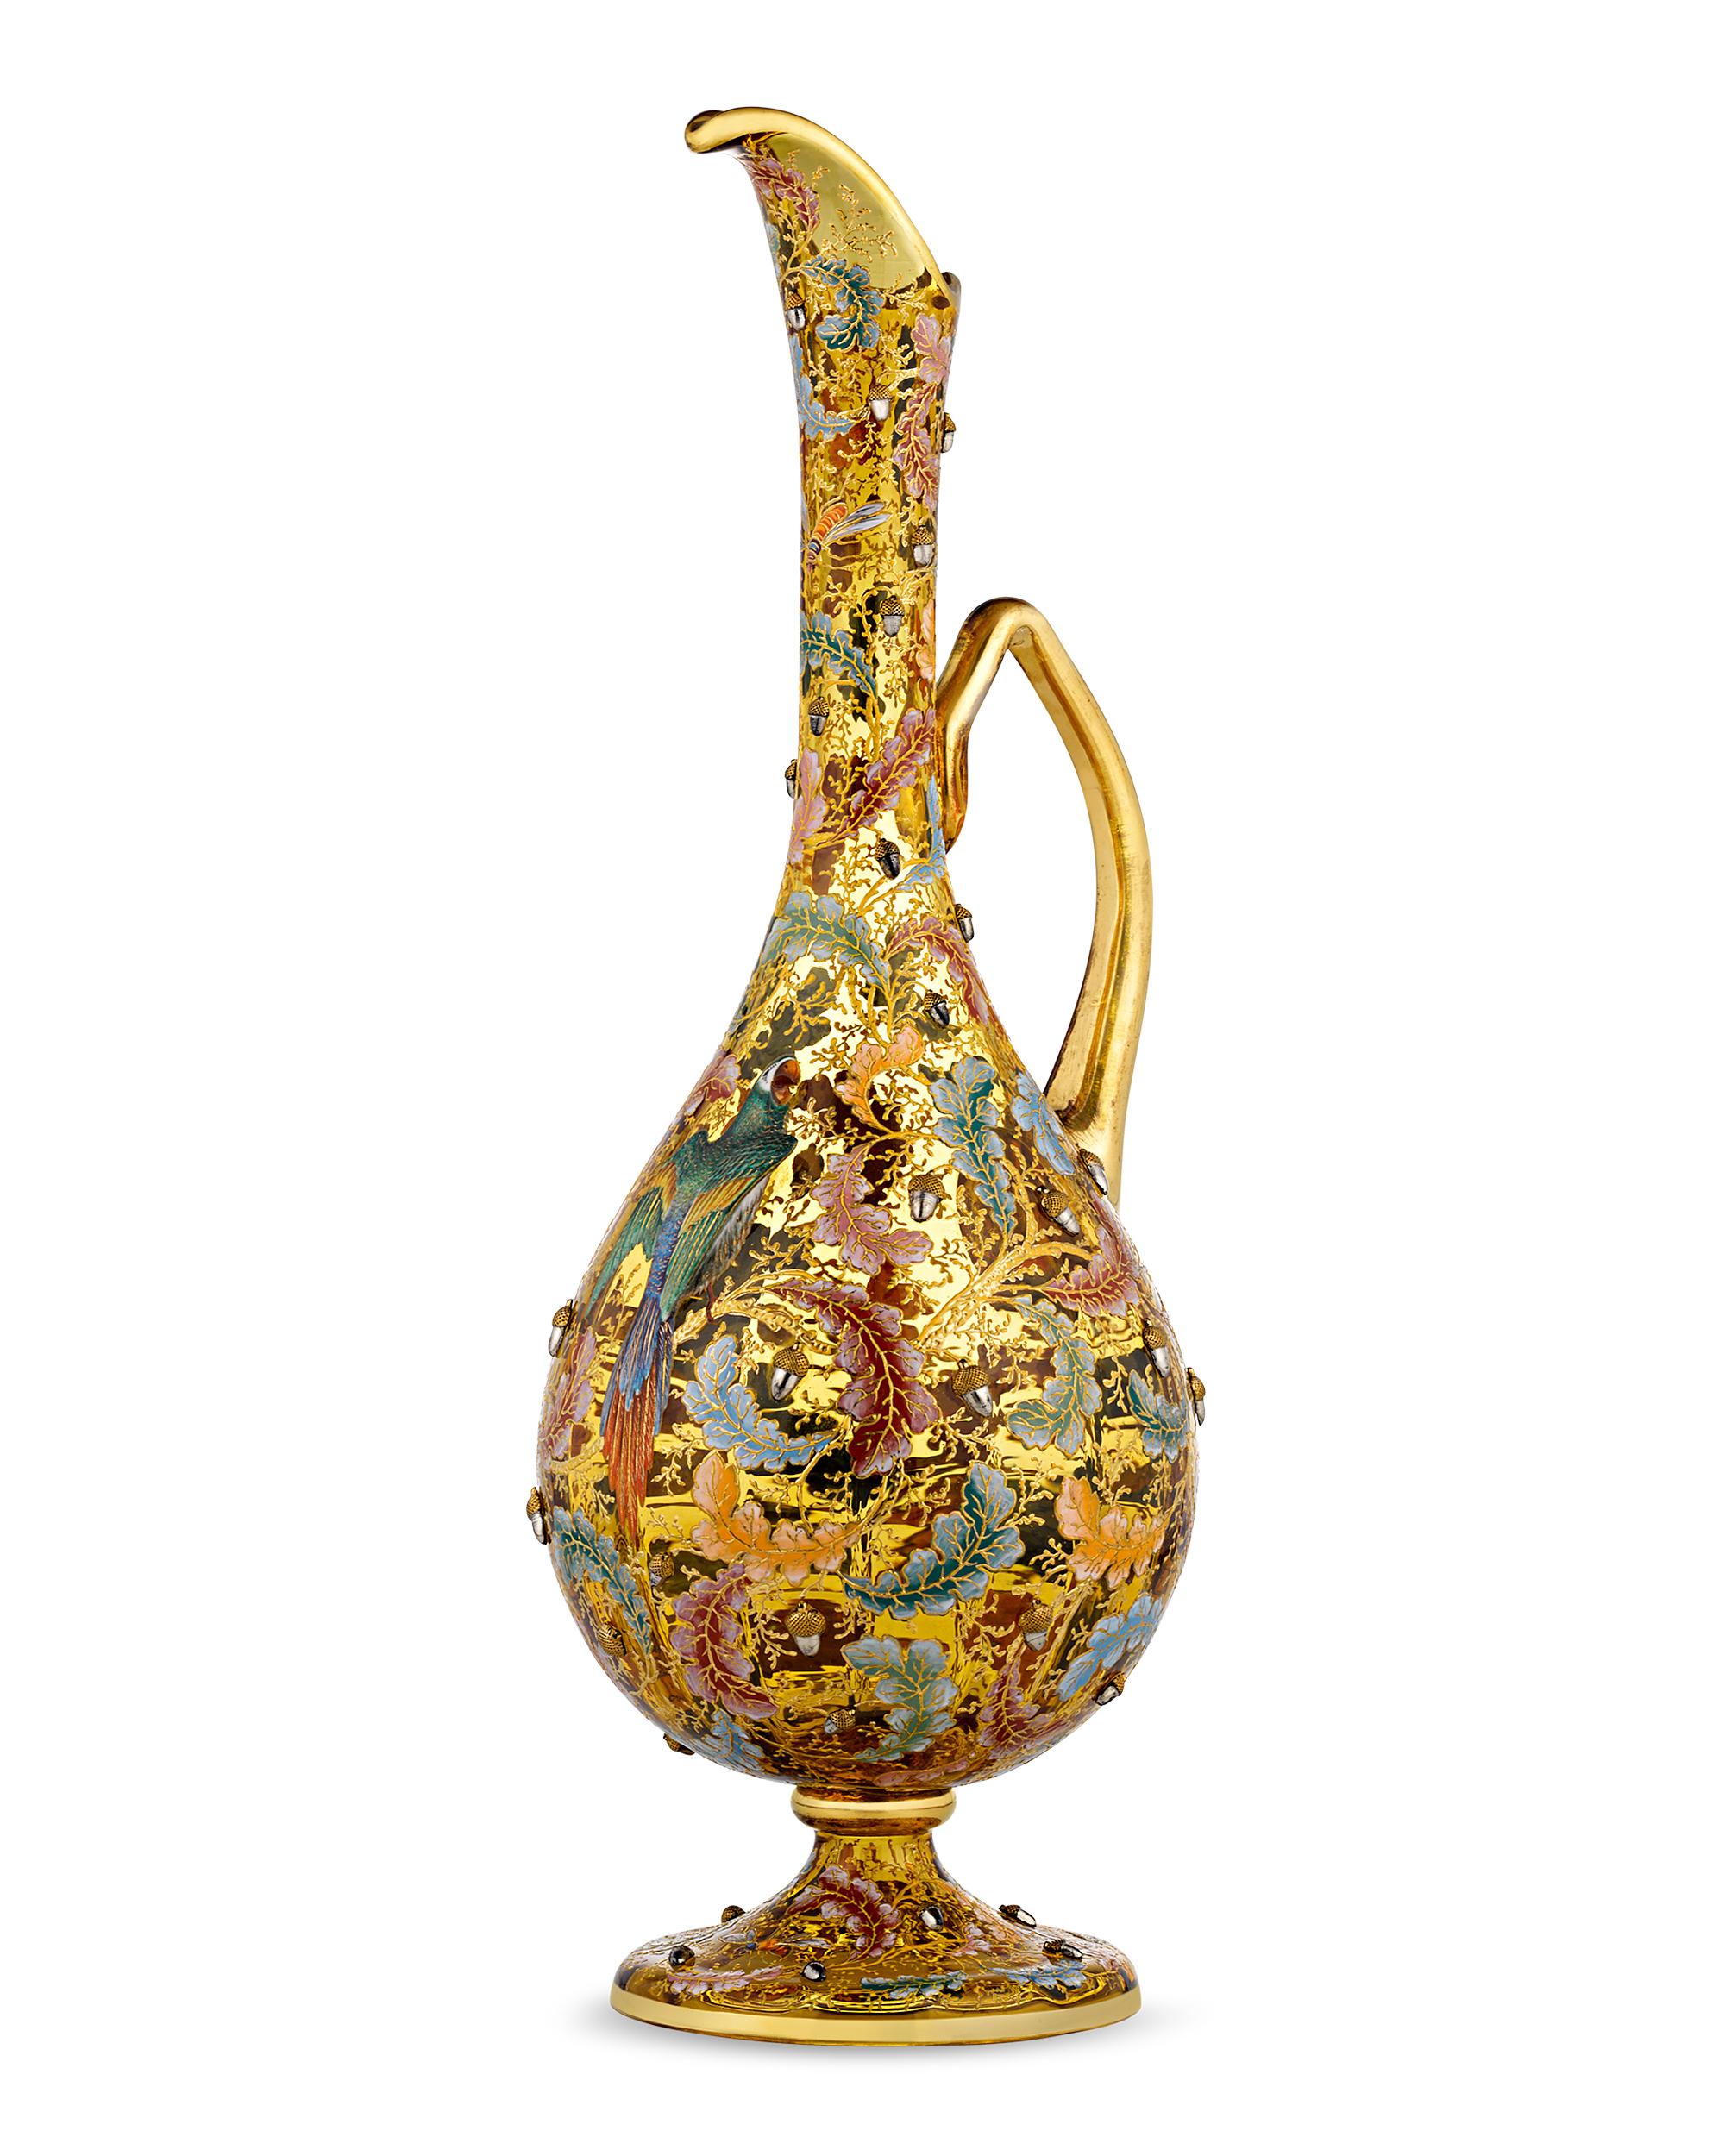 Vibrantly colored enamel decoration and gilt detailing distinguishes this exquisite amber glass ewer by Moser. Applied enamel acorns are surrounded by colorful oak leaves in this highly desirable and charming motif, which perfectly captures the